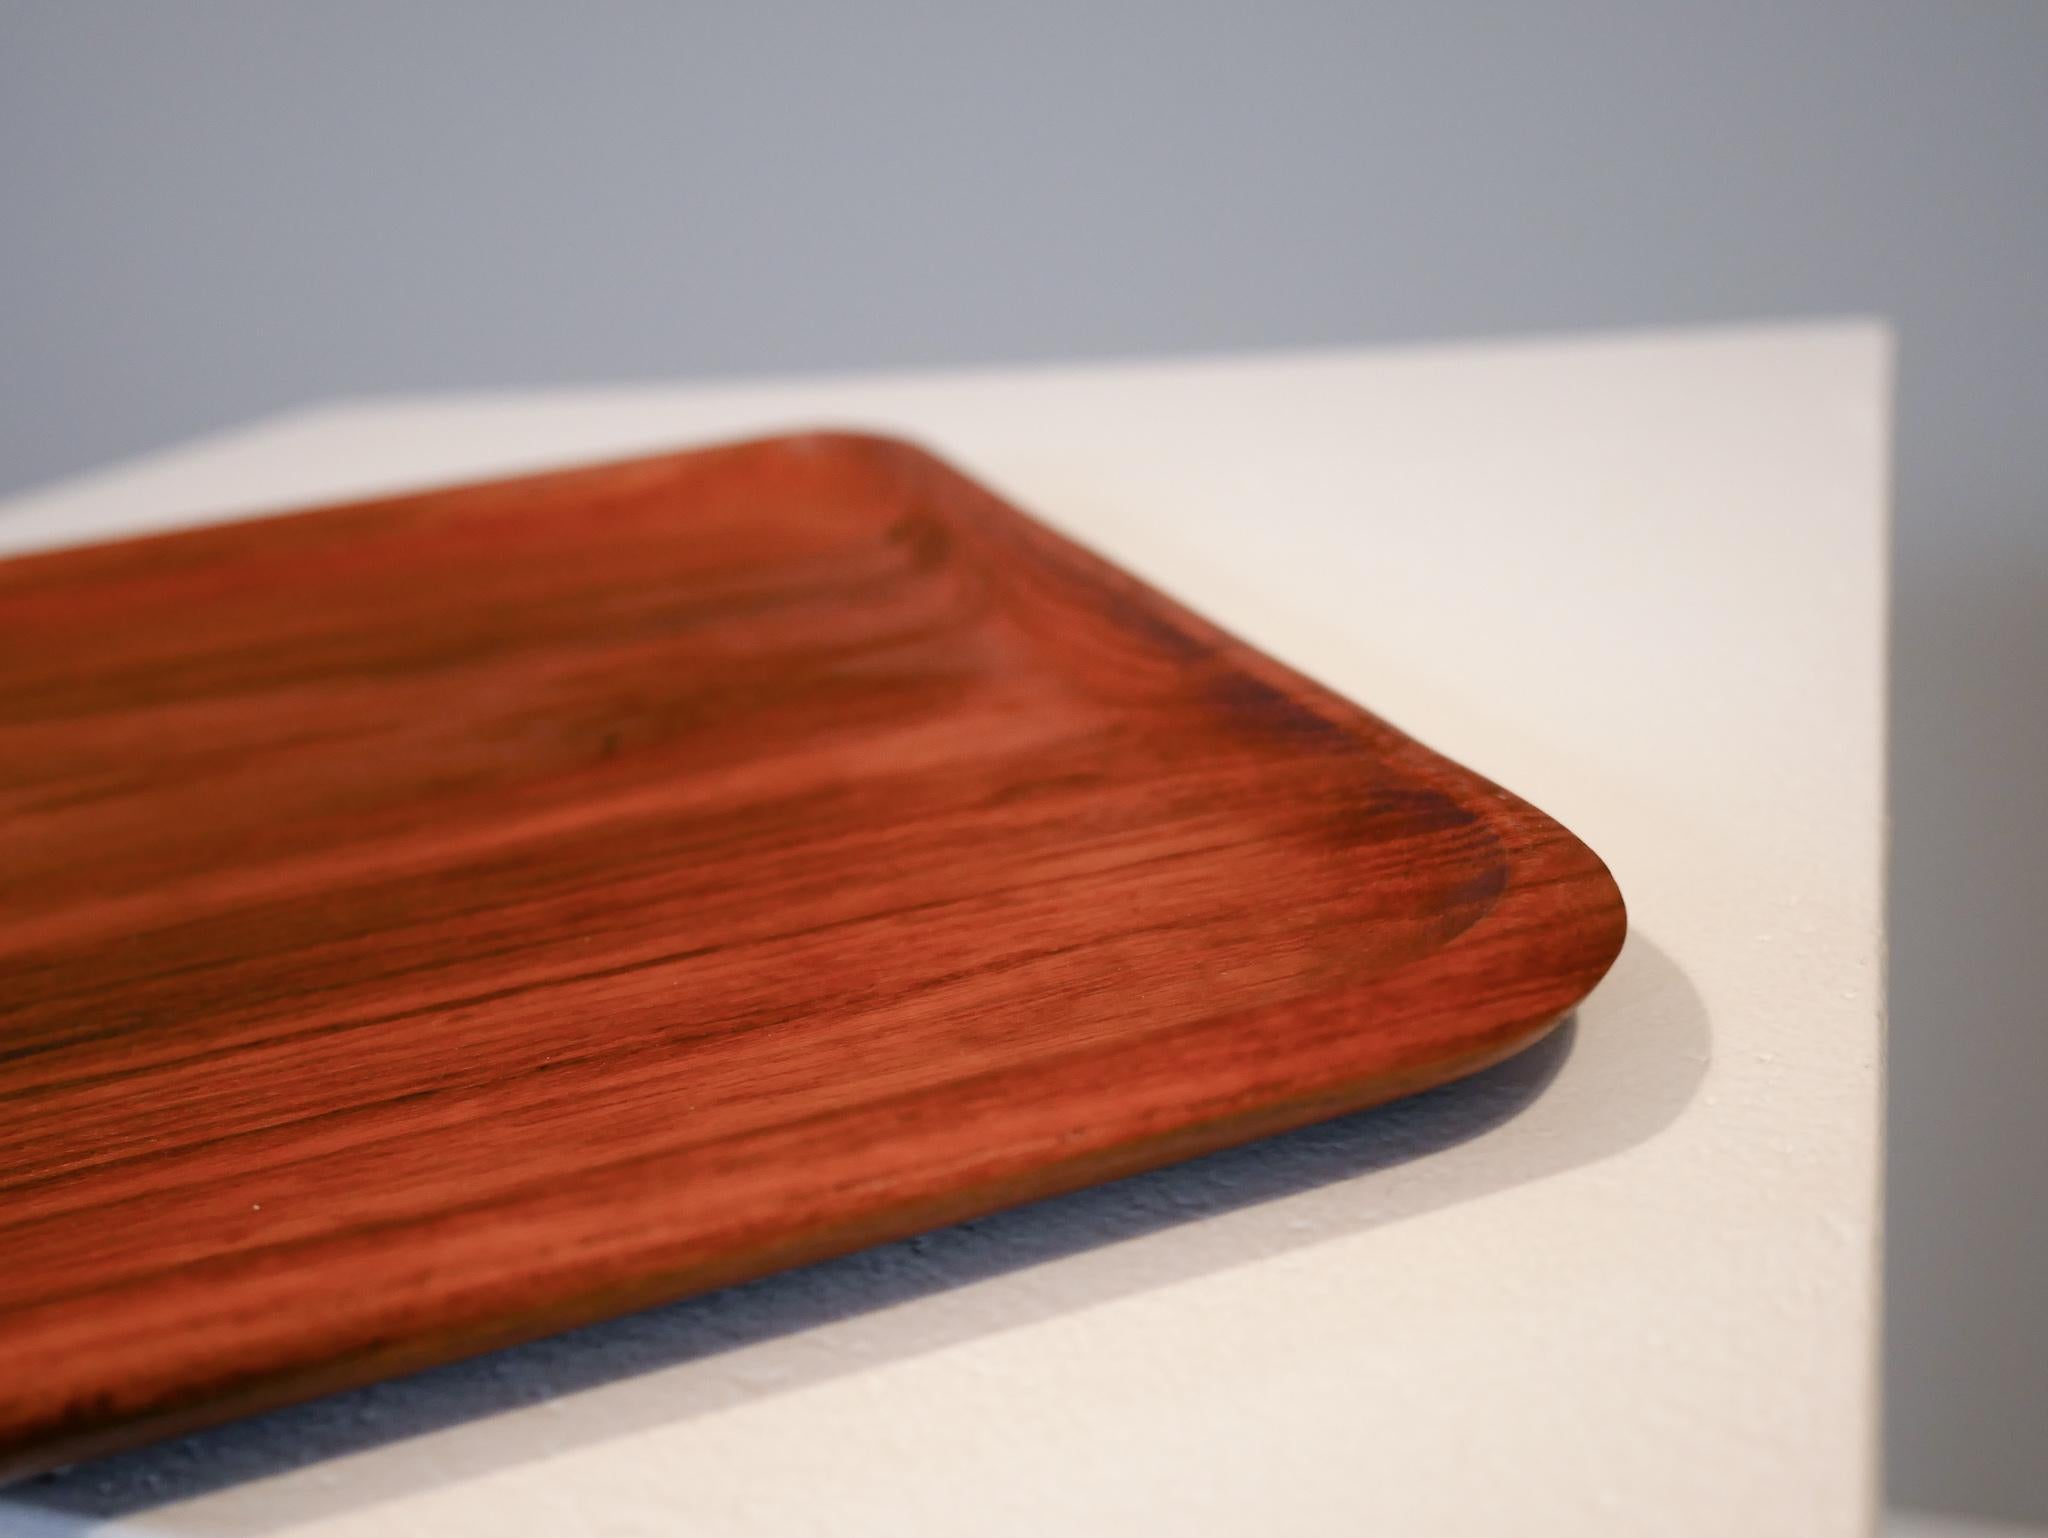 Mid-20th Century Solid Teak Tray Karl Holmberg AB Sweden, 1950s For Sale